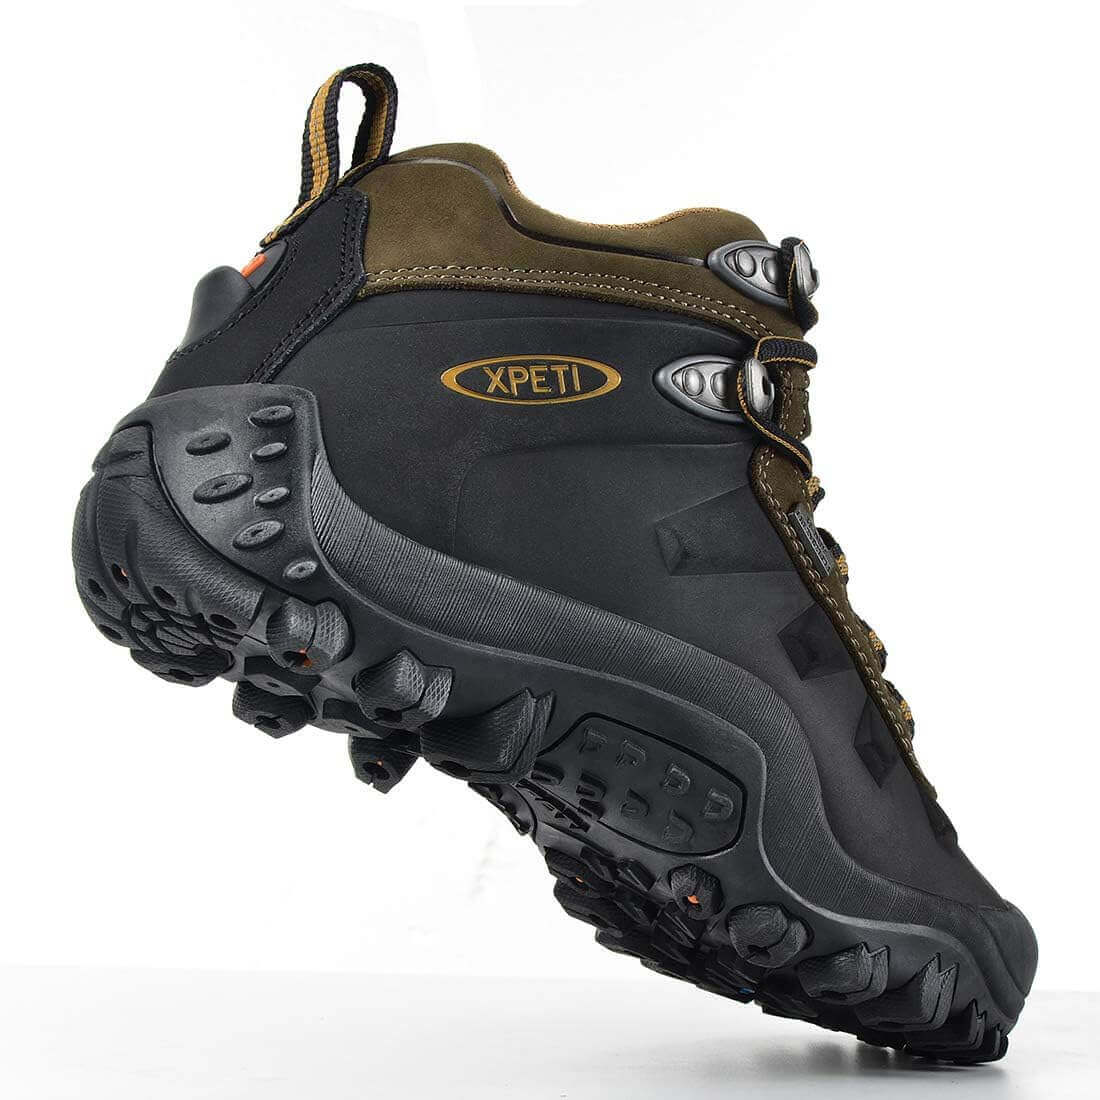 Shop The Latest >XPETI Men’s Highland Waterproof Leather Hiking Boot > *Only $93.14*> From The Top Brand > *XPETIl* > Shop Now and Get Free Shipping On Orders Over $45.00 >*Shop Earth Foot*